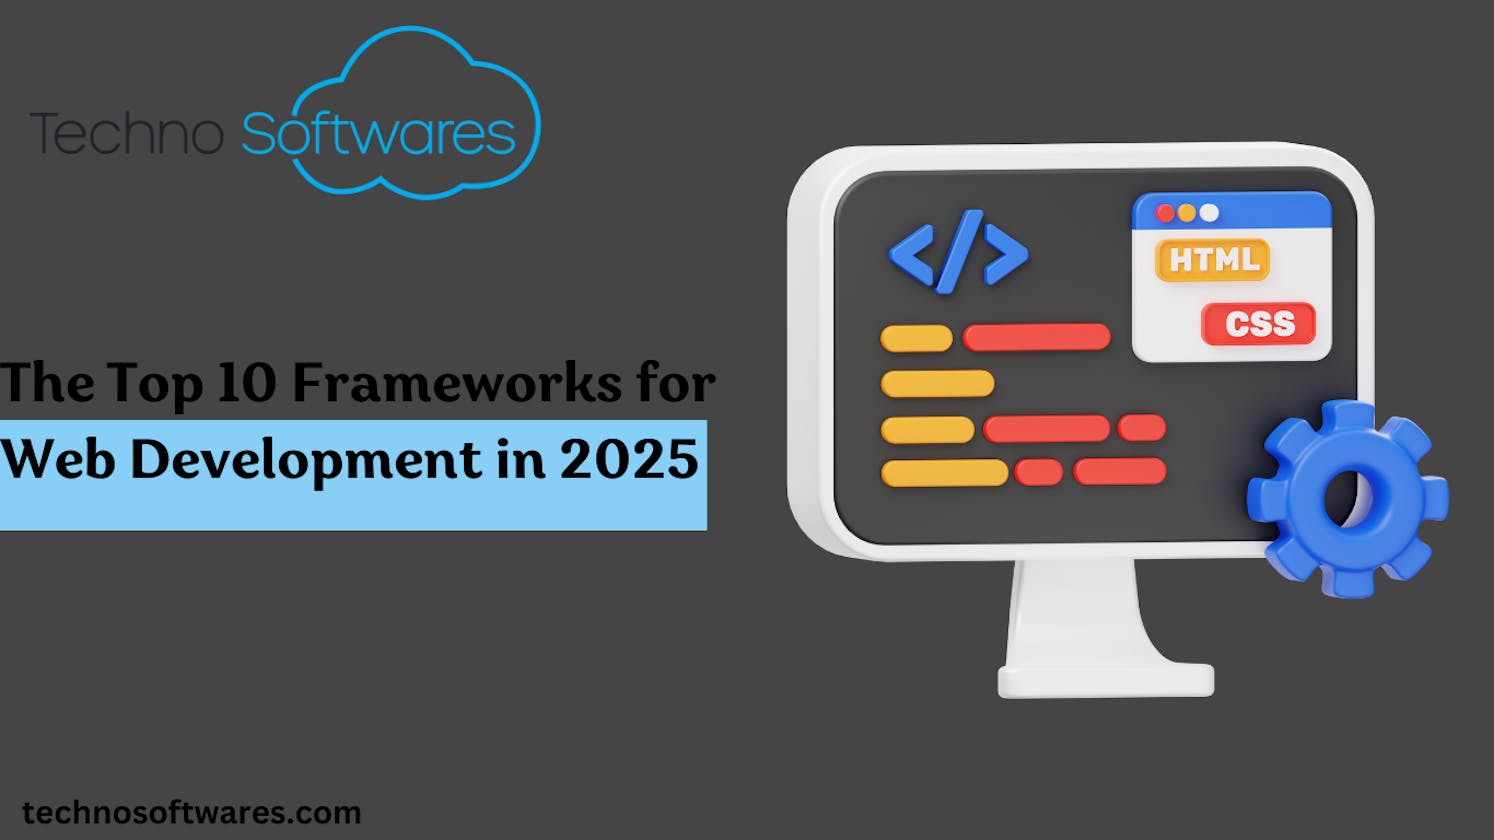 The Top 10 Frameworks for Web Development in 2025